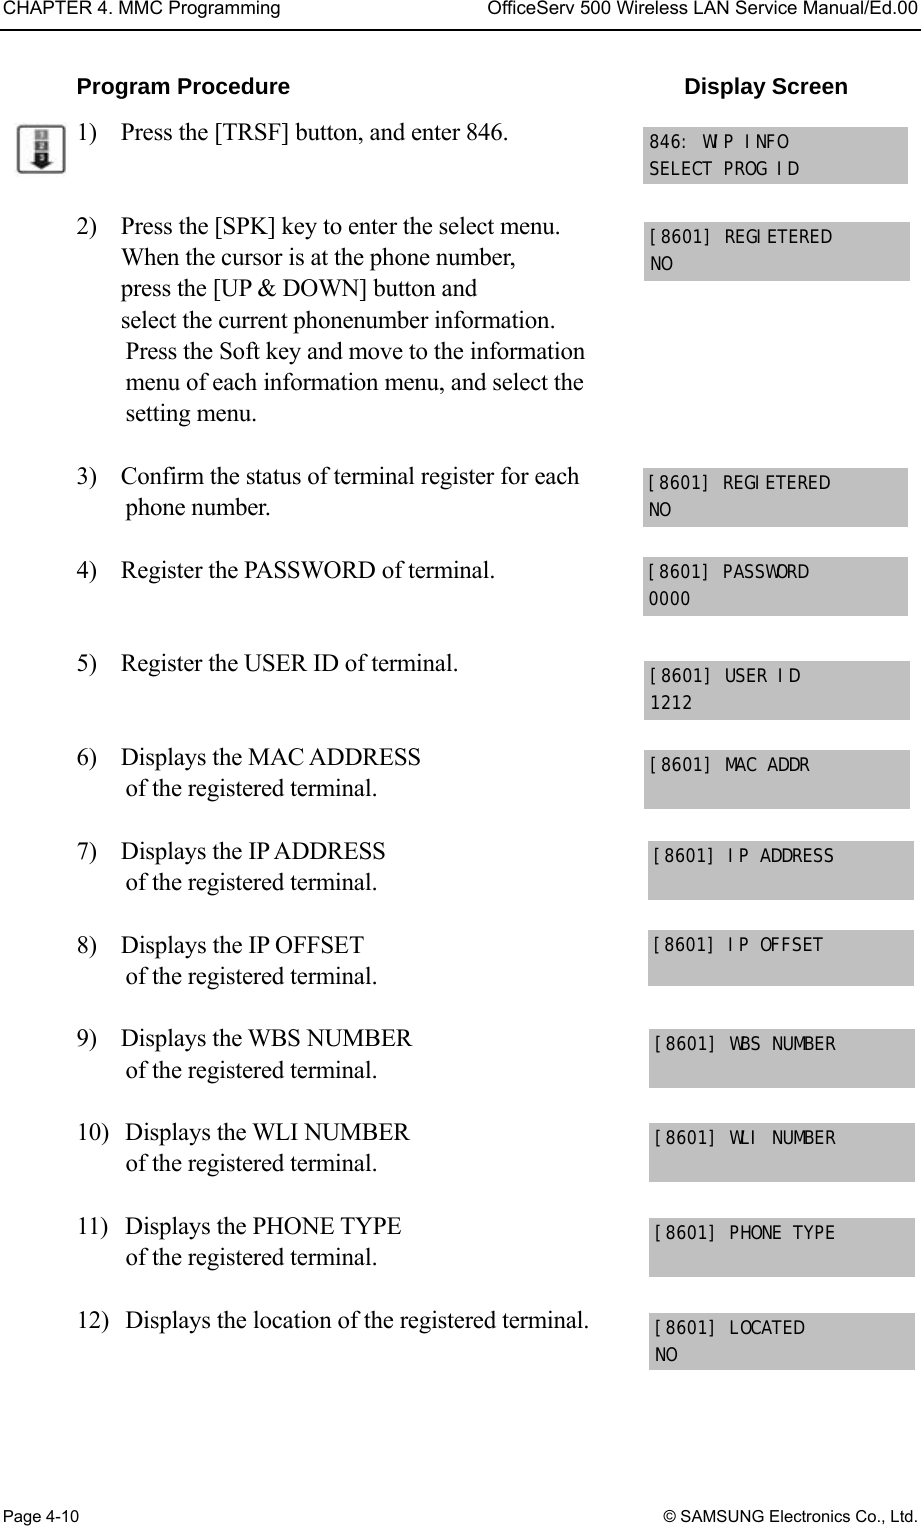 CHAPTER 4. MMC Programming  OfficeServ 500 Wireless LAN Service Manual/Ed.00 Page 4-10 © SAMSUNG Electronics Co., Ltd. Program Procedure                                   Display Screen 1)    Press the [TRSF] button, and enter 846.     2)    Press the [SPK] key to enter the select menu. When the cursor is at the phone number,   press the [UP &amp; DOWN] button and   select the current phonenumber information. Press the Soft key and move to the information   menu of each information menu, and select the   setting menu.  3)    Confirm the status of terminal register for each   phone number.  4)    Register the PASSWORD of terminal.   5)    Register the USER ID of terminal.   6)  Displays the MAC ADDRESS  of the registered terminal.  7)  Displays the IP ADDRESS  of the registered terminal.  8)    Displays the IP OFFSET   of the registered terminal.  9)  Displays the WBS NUMBER  of the registered terminal.  10)  Displays the WLI NUMBER   of the registered terminal.  11)  Displays the PHONE TYPE   of the registered terminal.  12)   Displays the location of the registered terminal.   846: WIP INFO SELECT PROG ID [8601] REGIETERED NO [8601] REGIETERED NO [8601] PASSWORD 0000 [8601] MAC ADDR  [8601] USER ID 1212 [8601] IP ADDRESS  [8601] IP OFFSET  [8601] WBS NUMBER  [8601] WLI NUMBER  [8601] PHONE TYPE [8601] LOCATED NO 